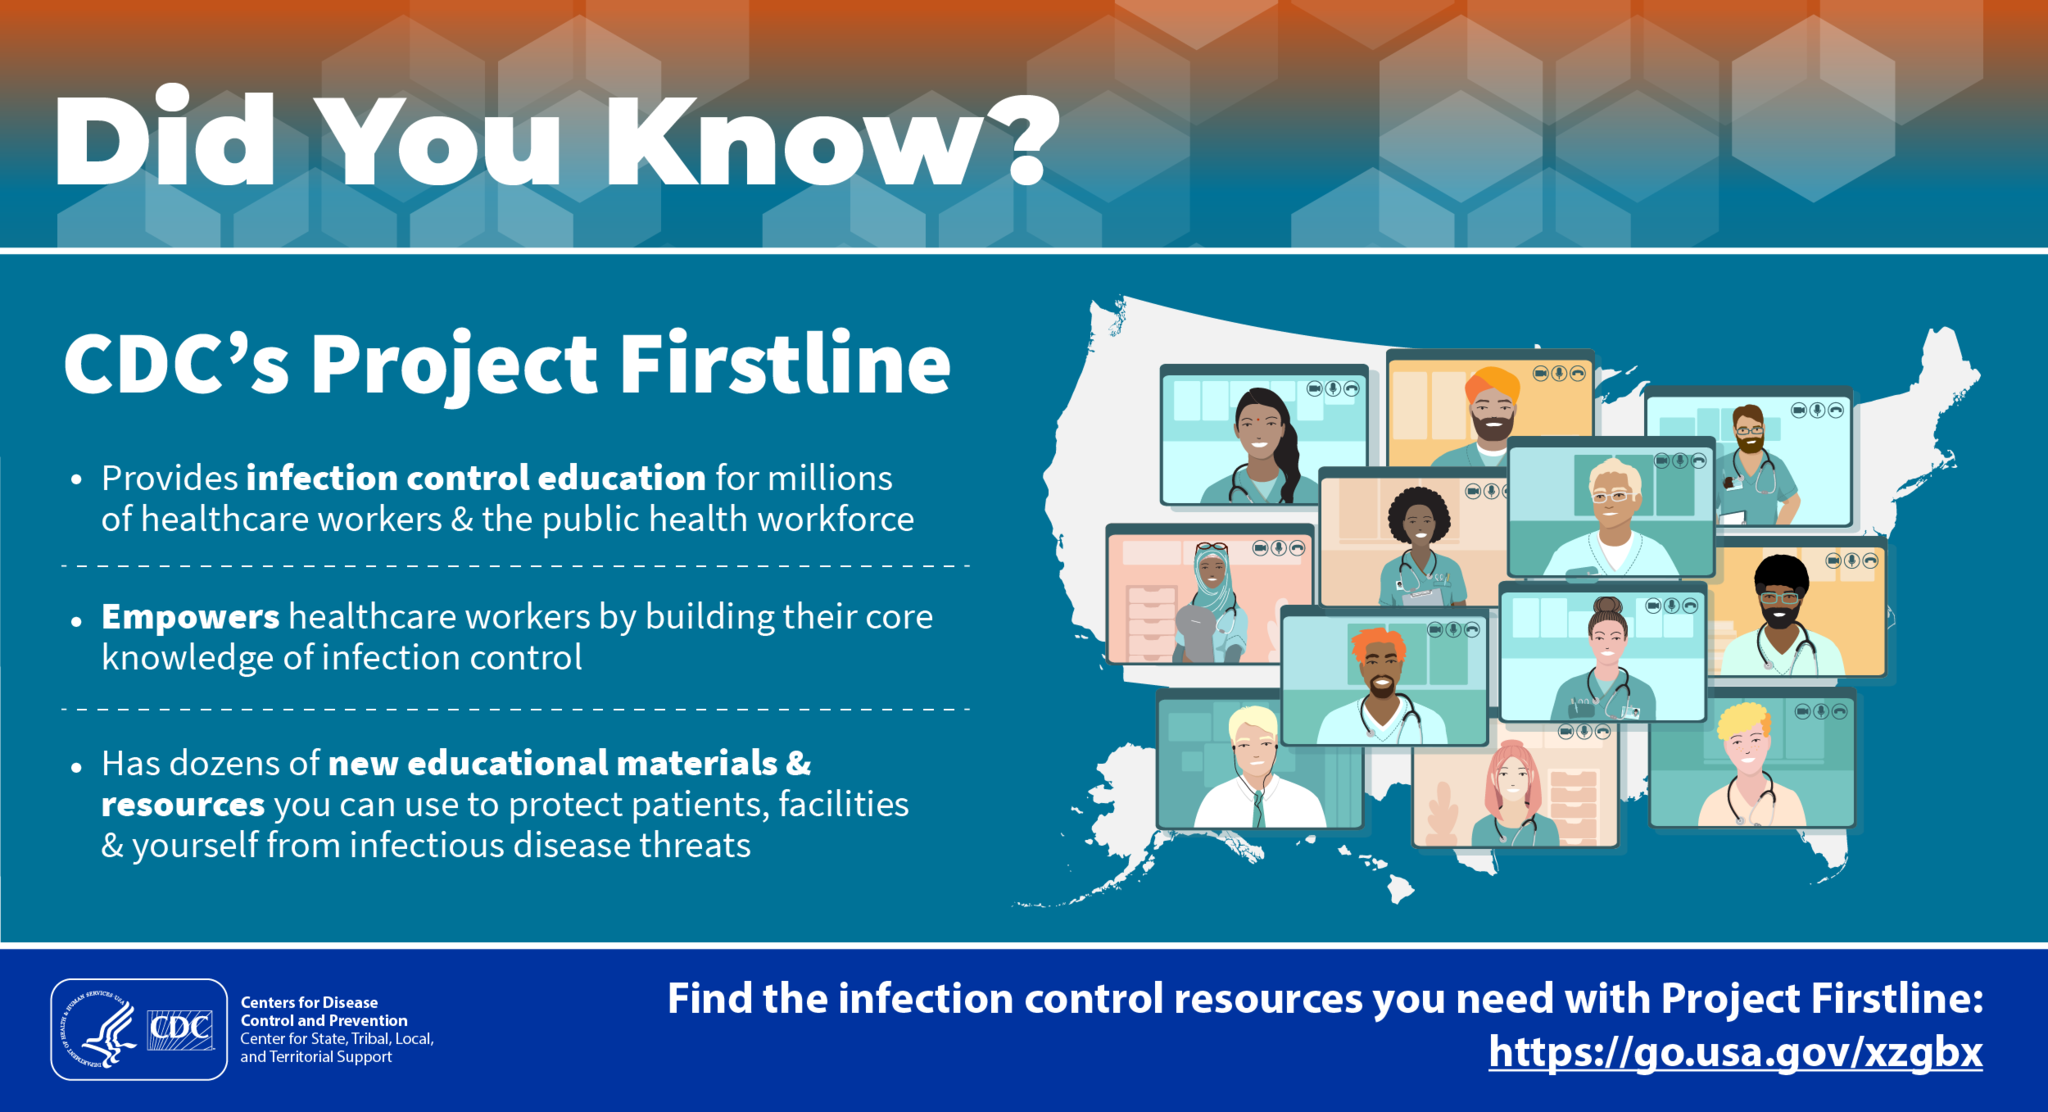 Did You Know? CDC’s Project Firstline provides infection control education for millions of healthcare workers & the public health workforce, empowers healthcare workers by building their core knowledge of infection control, and has dozens of new educational materials & resources you can use to protect patients, facilities & yourself from infectious disease threats. Find the infection control resources you need with Project Firstline: https://go.usa.gov/xzgbx